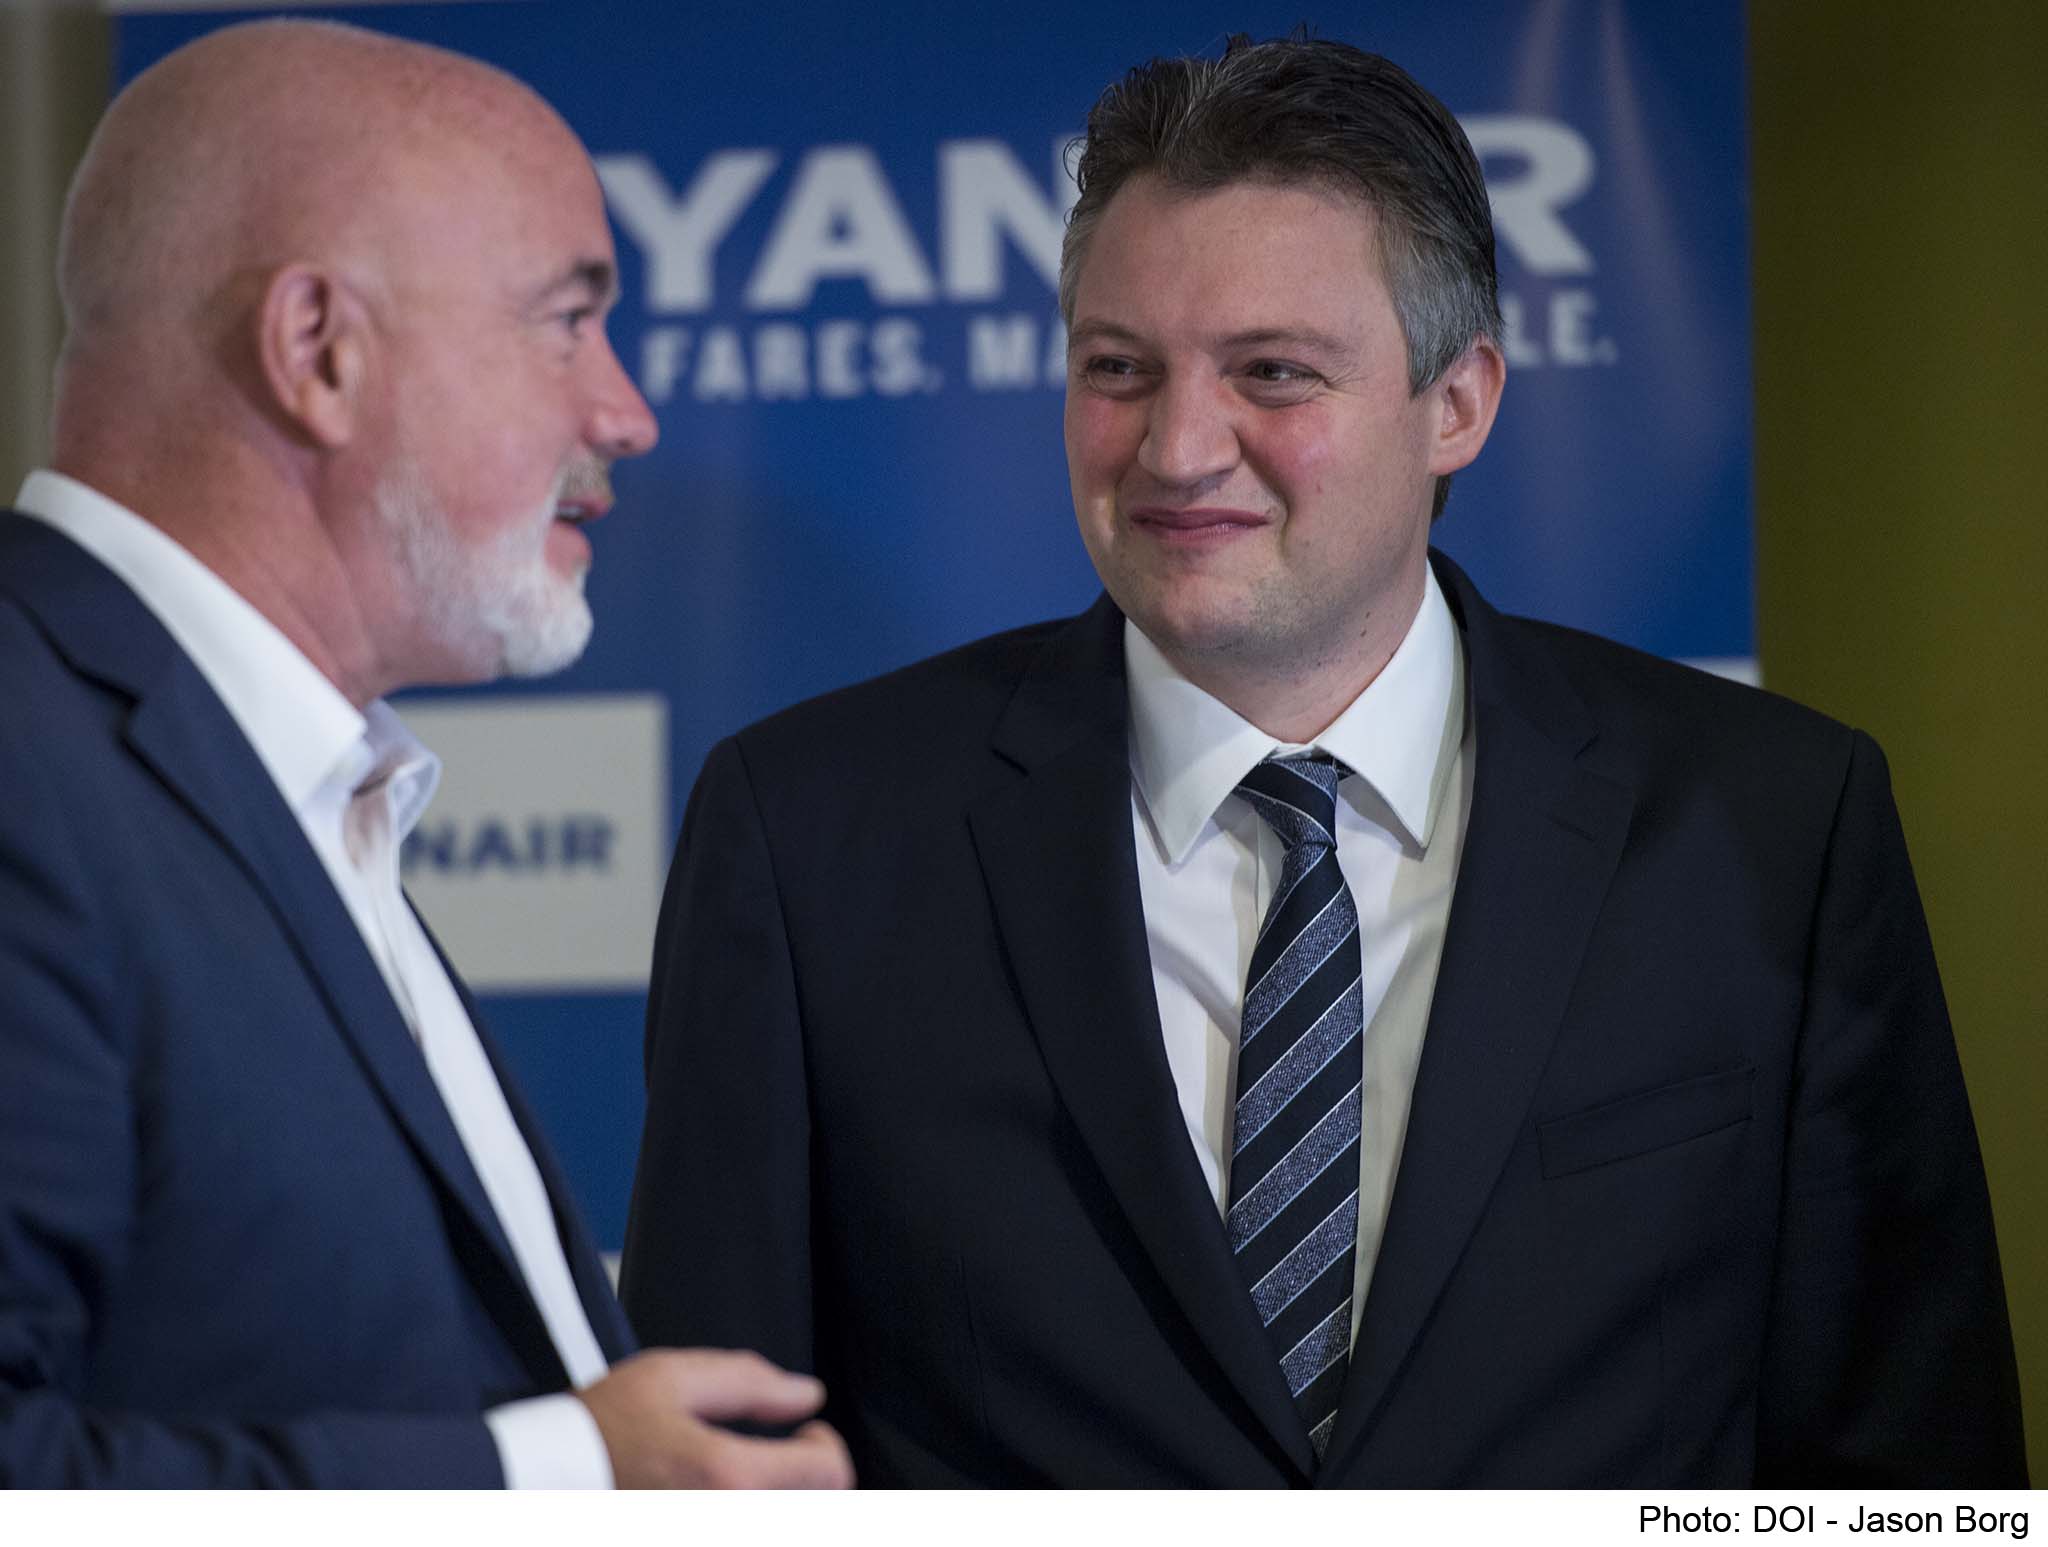 RYANAIR LAUNCHES MALTA S18 SCHEDULE  –  12 NEW ROUTES AS RYANAIR GROWS 40%